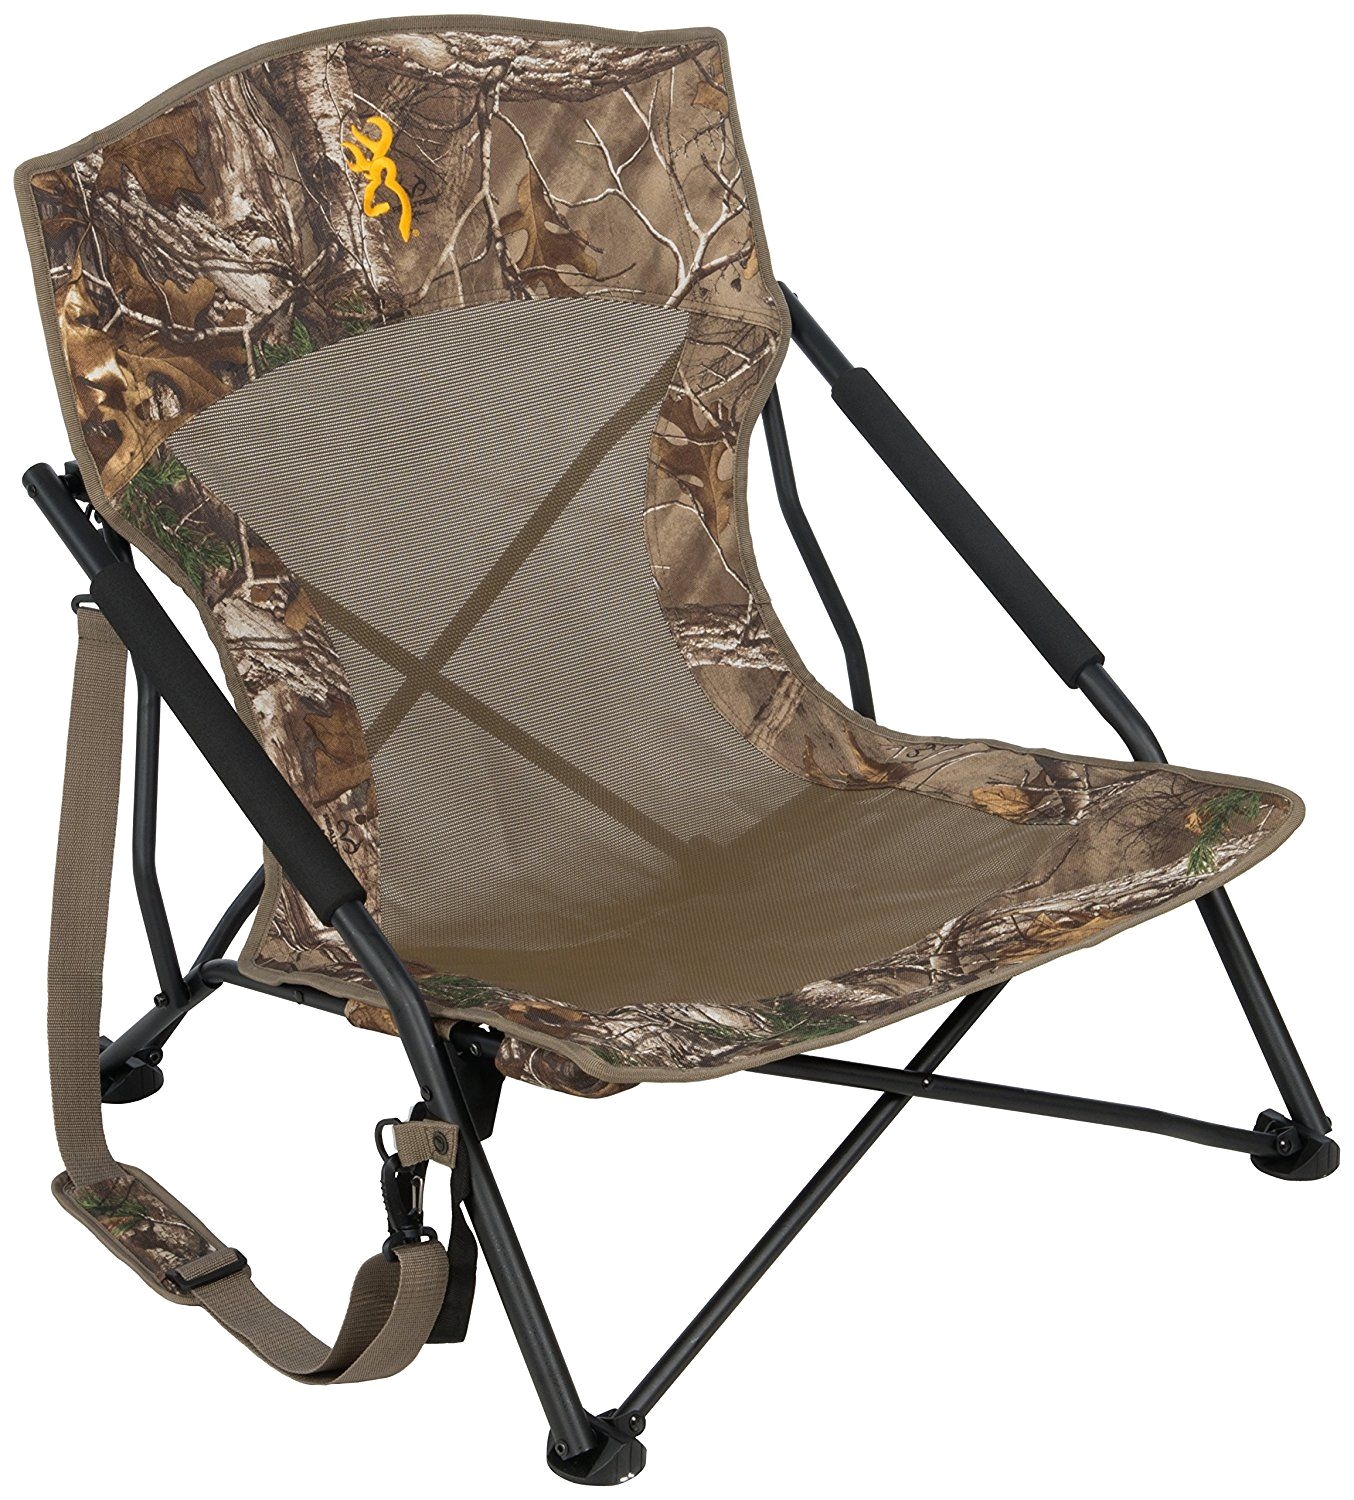 browning camping strutter folding chair this is an amazon affiliate link details can be found by clicking on the image